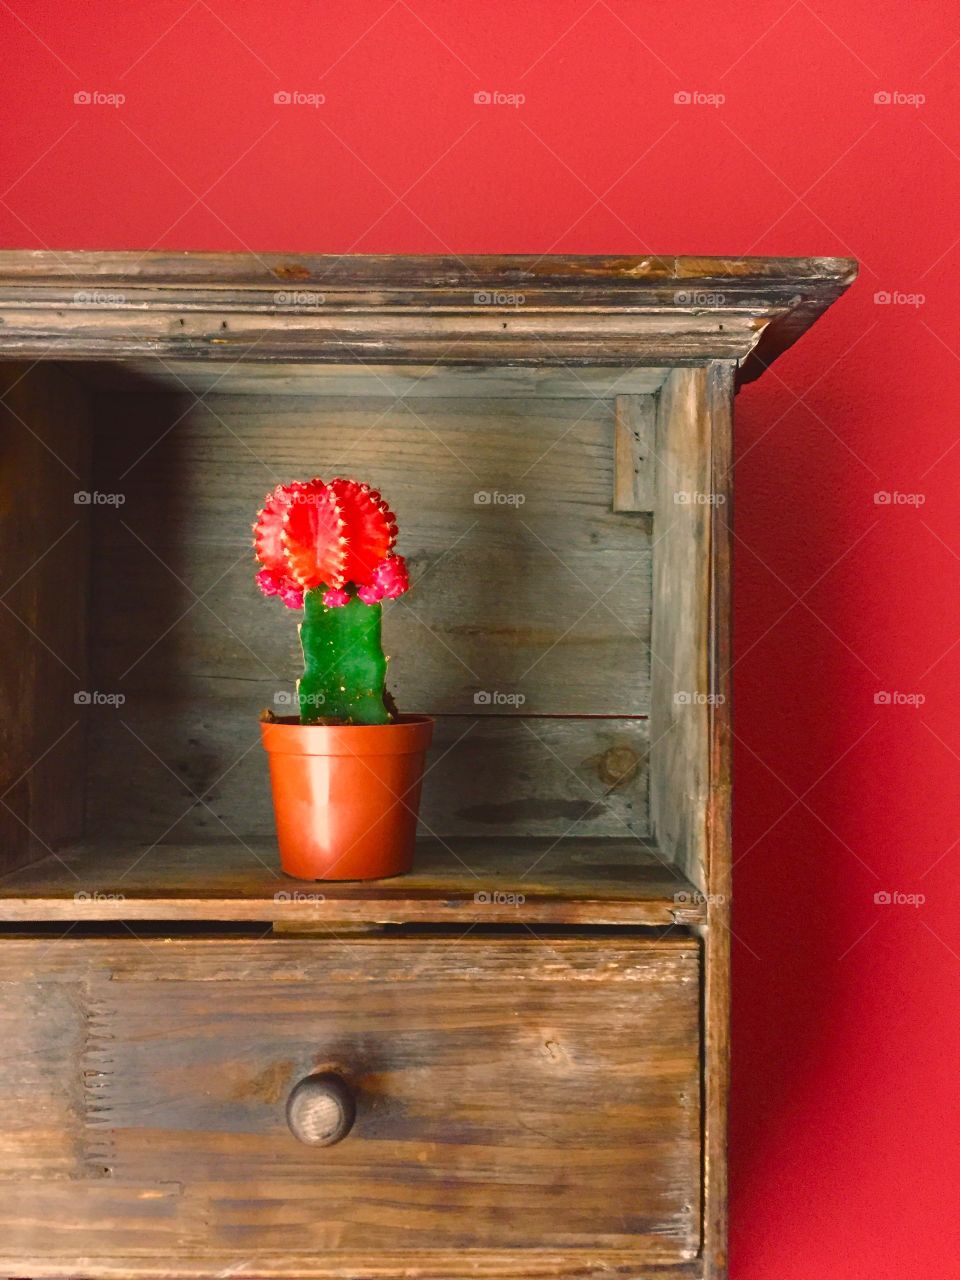 Color Love - A red Ruby Ball Cactus on a wooden shelf against a red wall